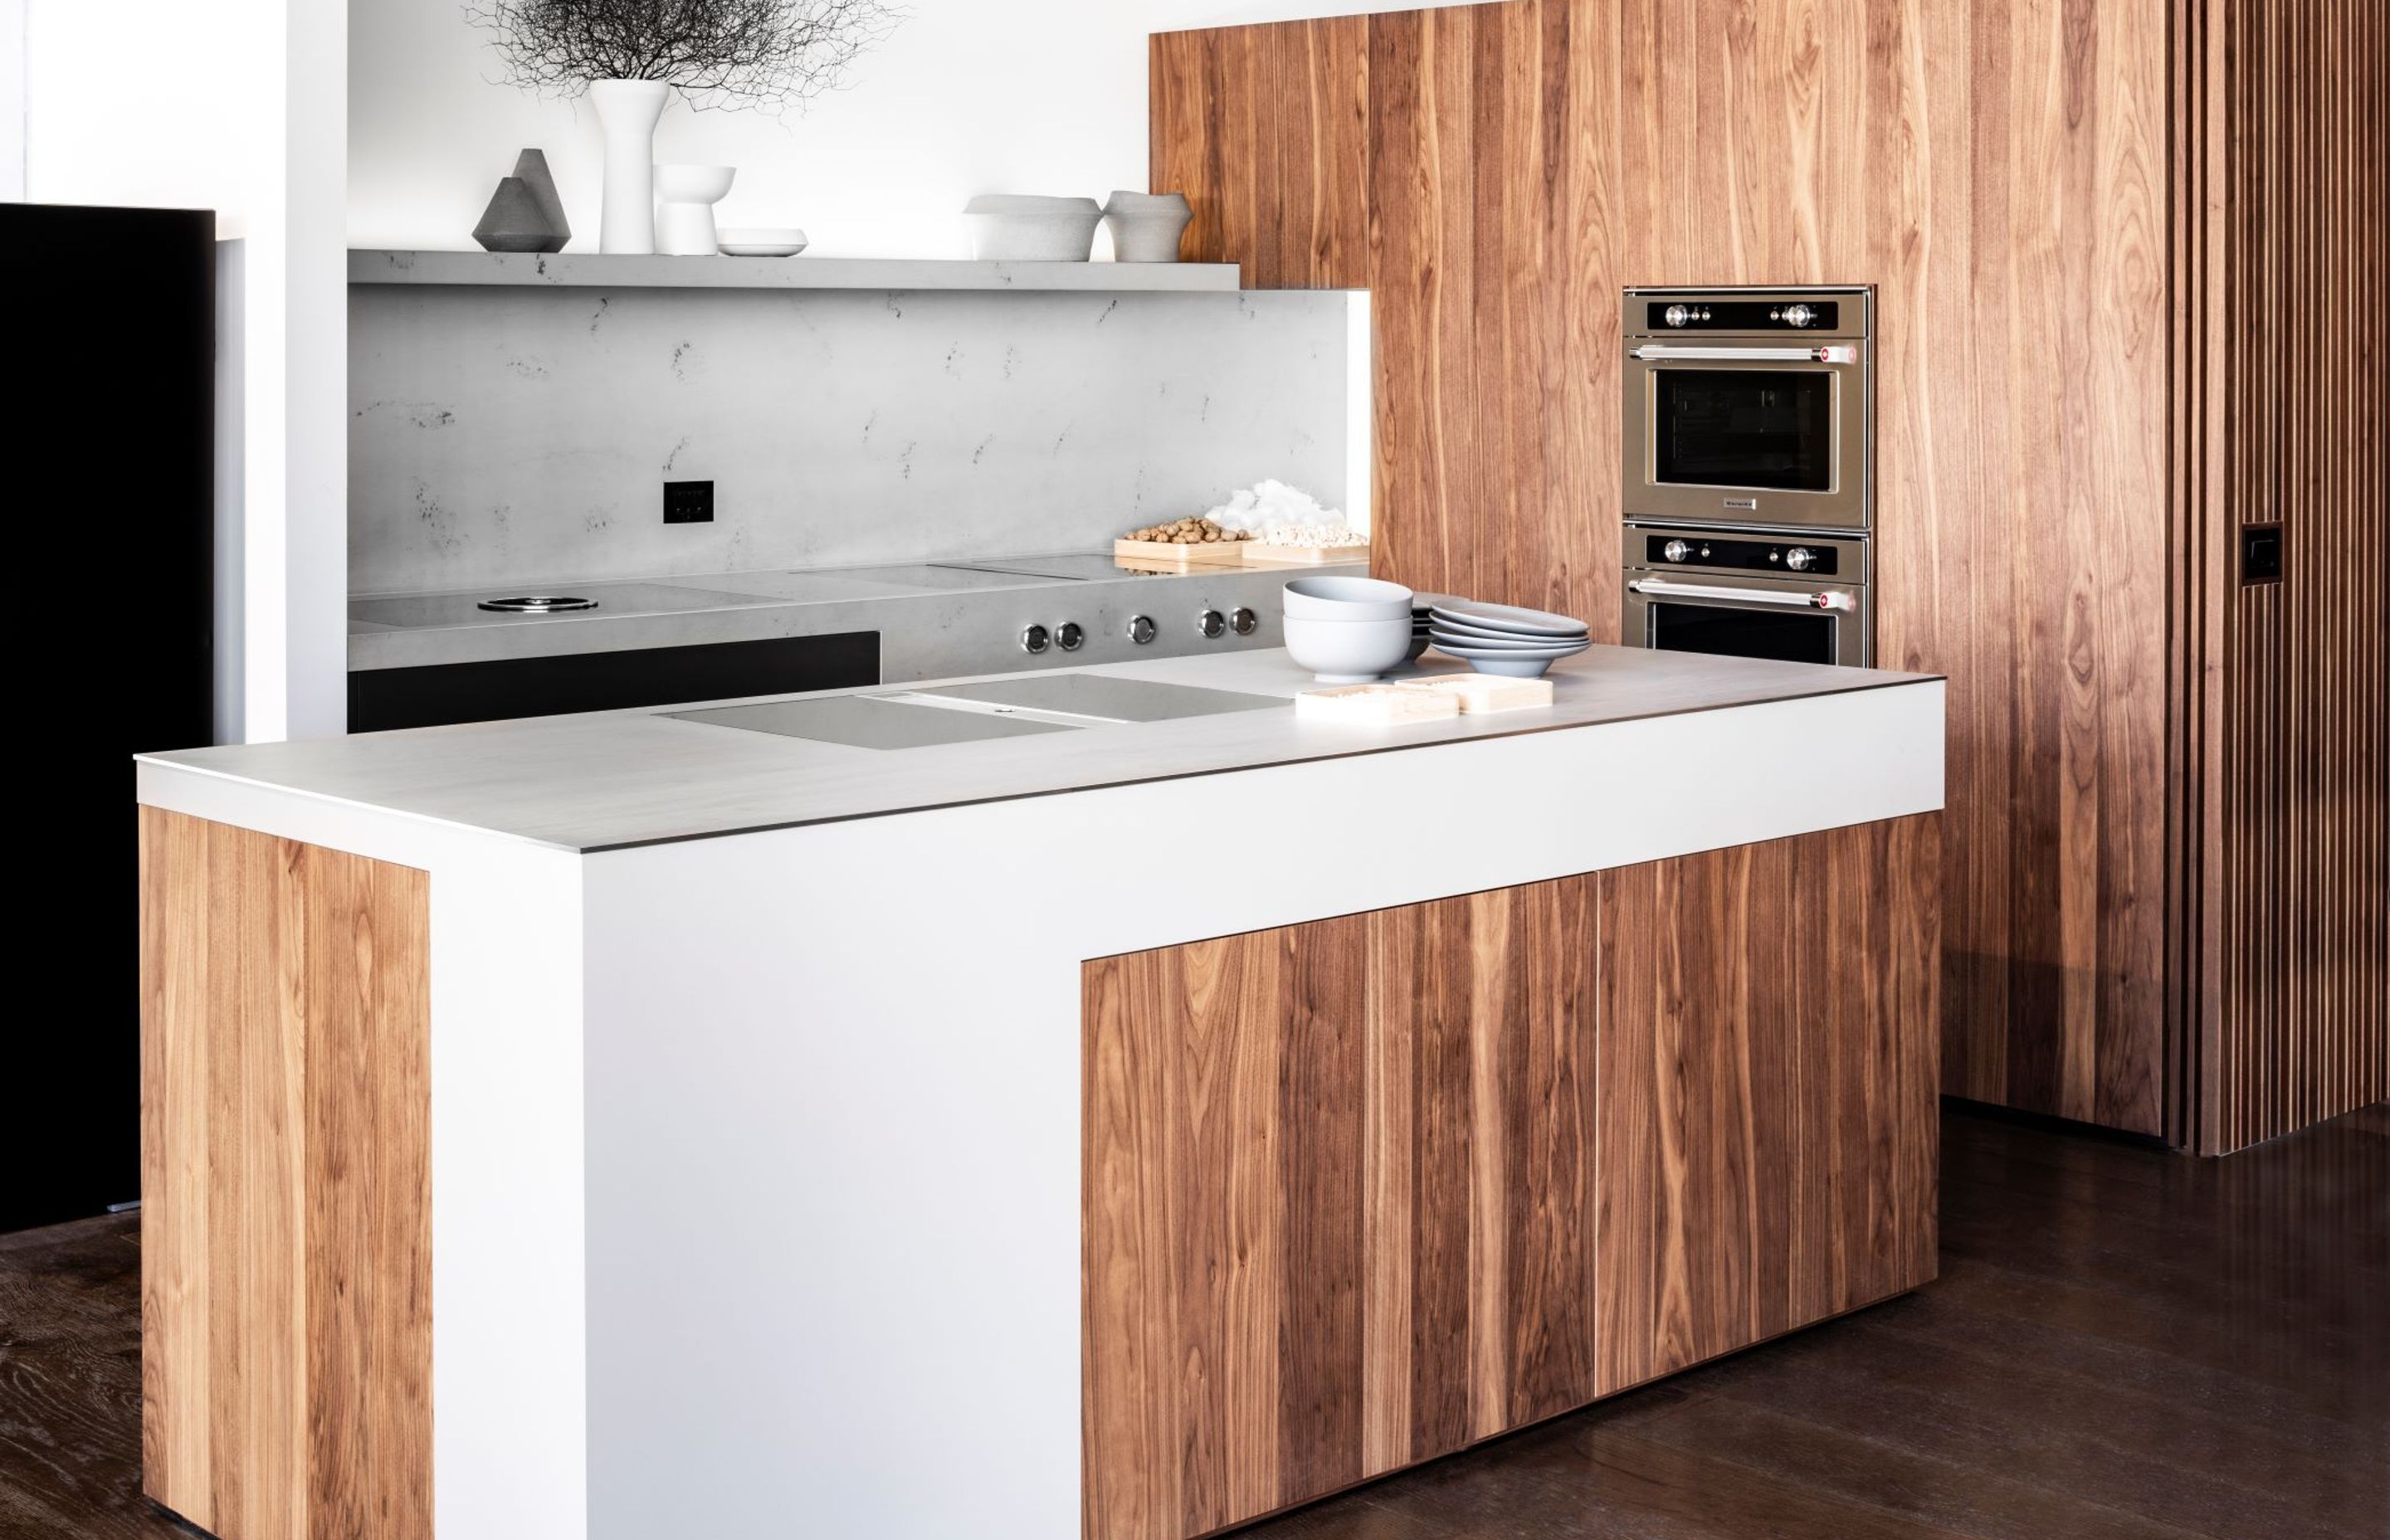 A stunning minimalist design was created by Living Design to enhance the BORA cooktops which have integrated extractors.